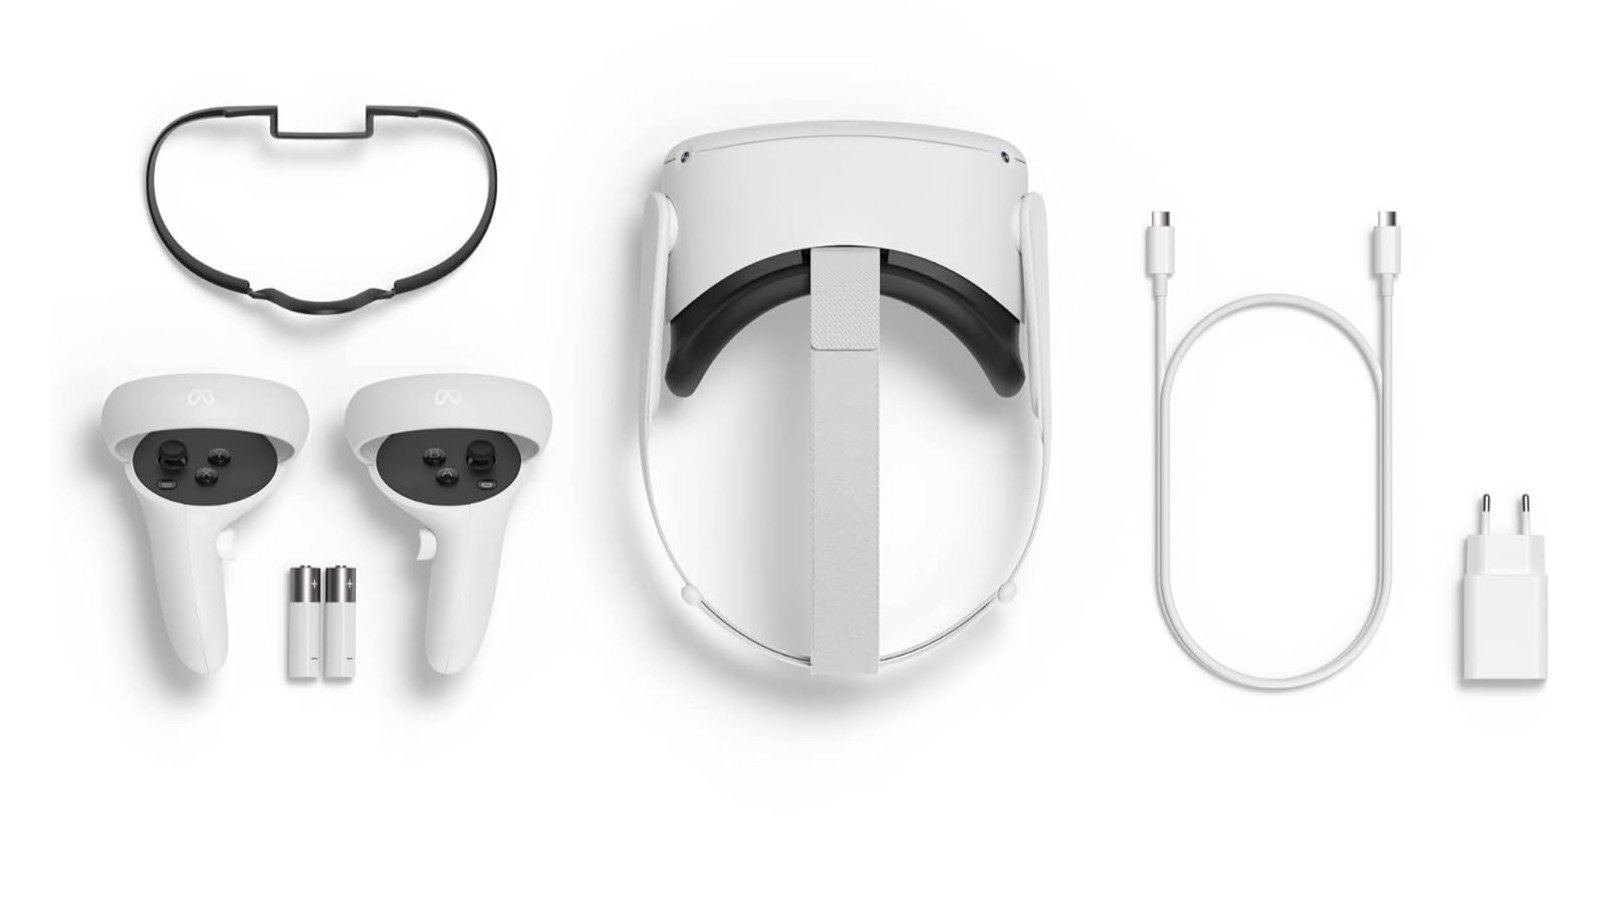 Meta Quest 2 VR headset product image against a white background.